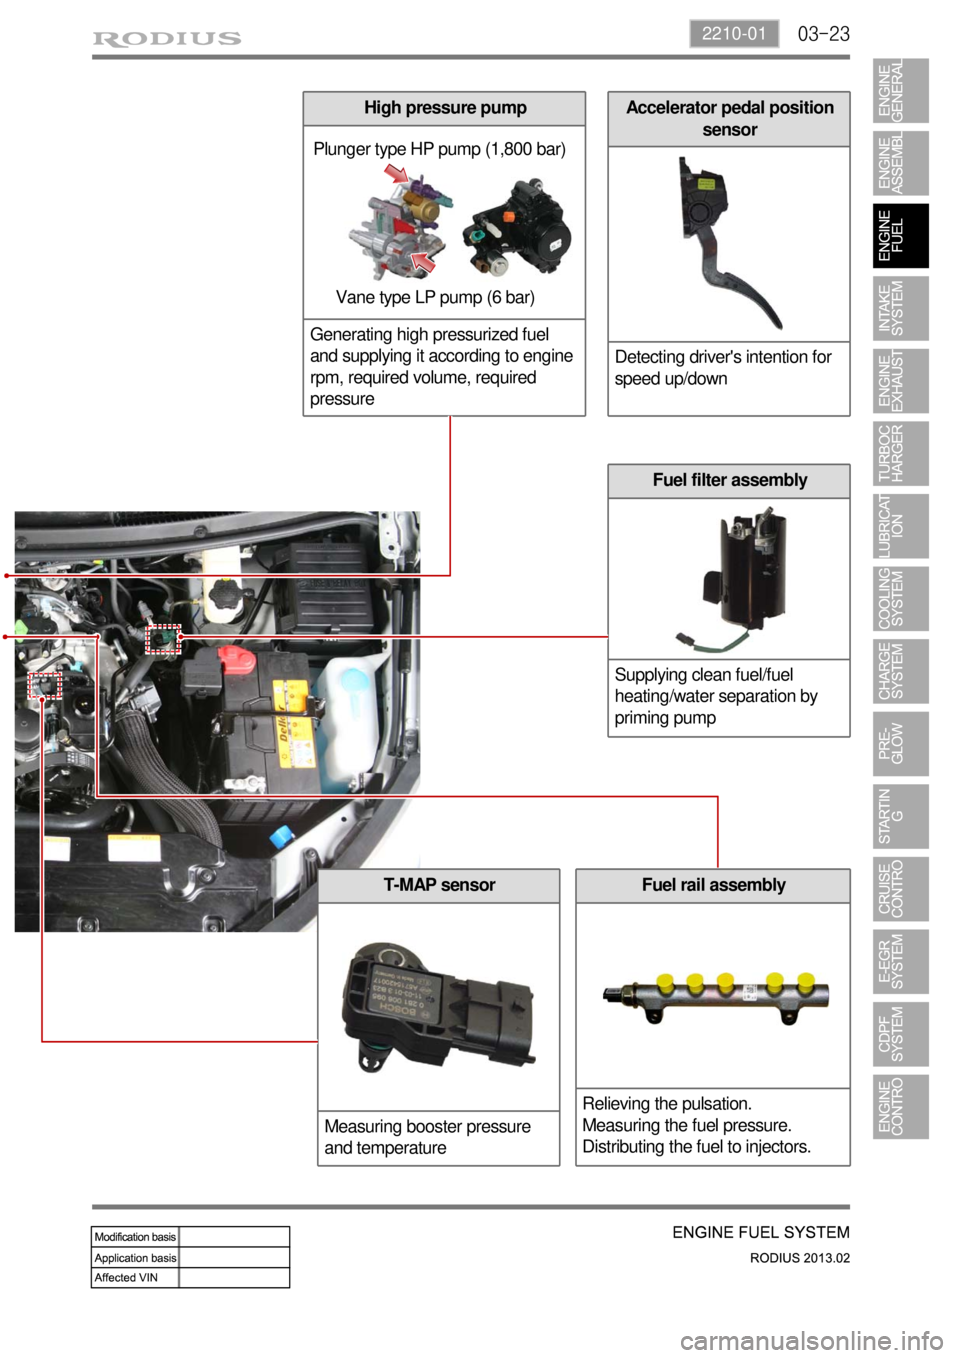 SSANGYONG TURISMO 2013  Service Manual 03-232210-01
T-MAP sensor
Measuring booster pressure 
and temperatureFuel rail assembly
Relieving the pulsation.
Measuring the fuel pressure.
Distributing the fuel to injectors.
Plunger type HP pump (